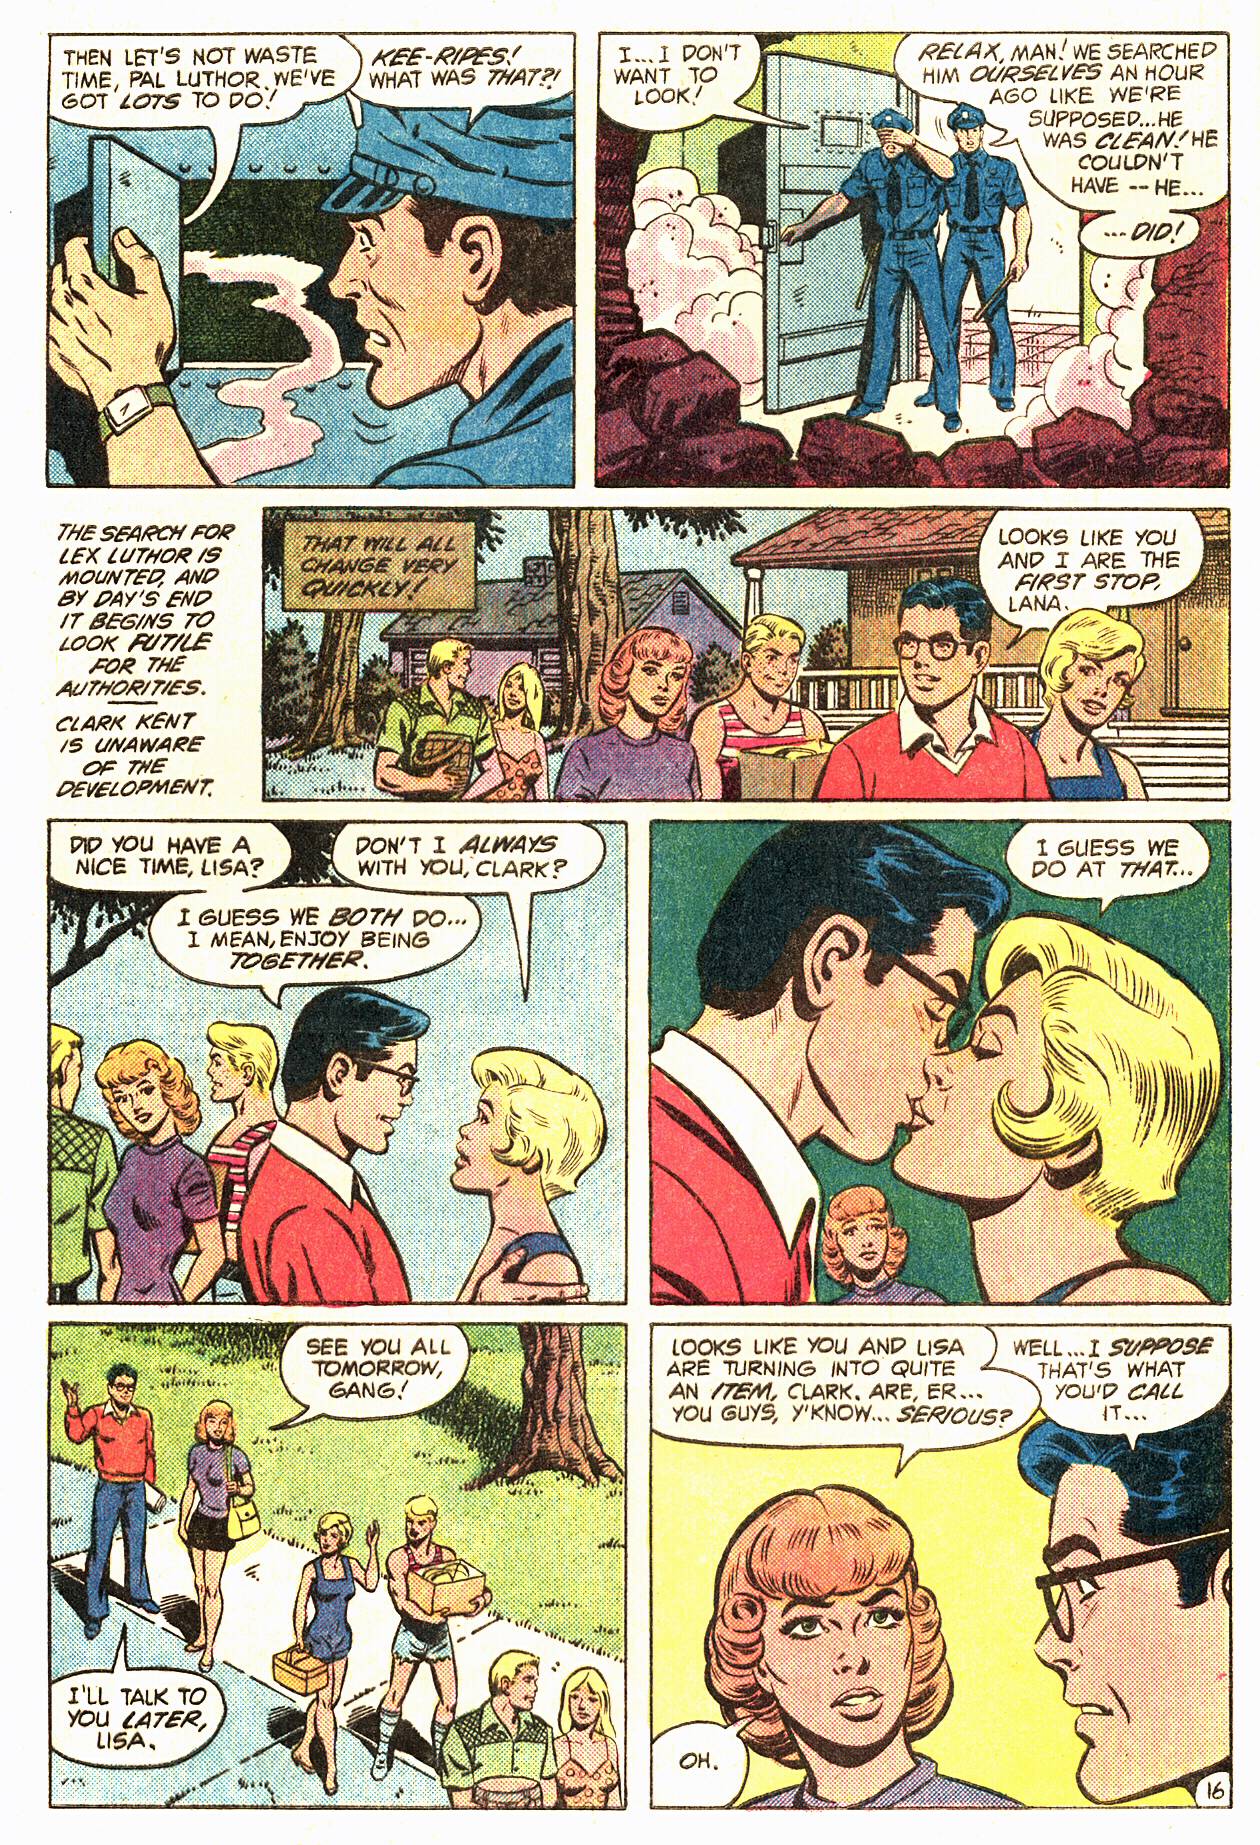 The New Adventures of Superboy 50 Page 16